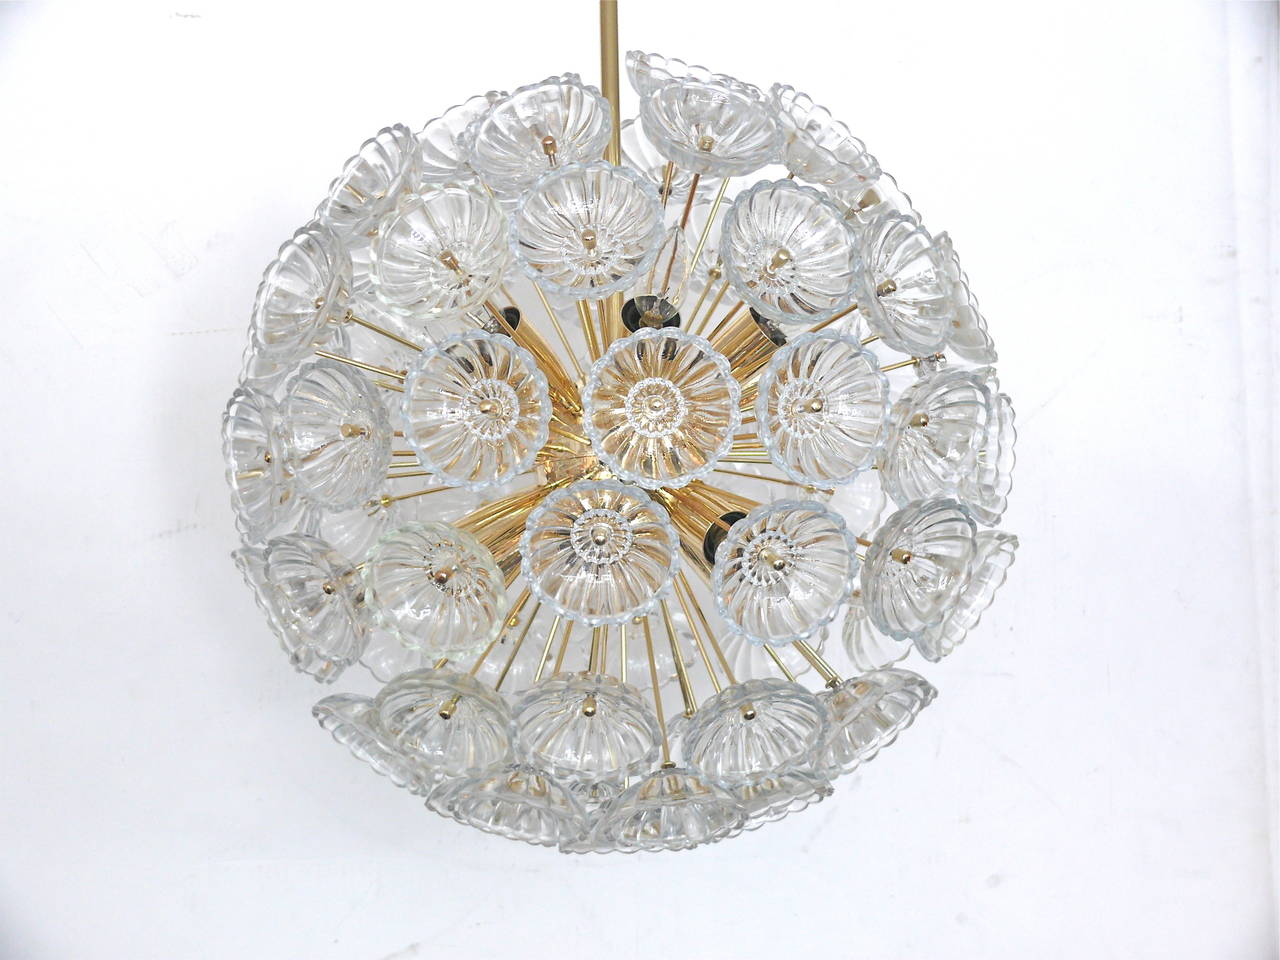 Large-scale brass and glass Sputnik chandelier. Multiple brass arms extend from a brass center ball. Two smaller matching chandeliers also available. Illuminates beautifully!